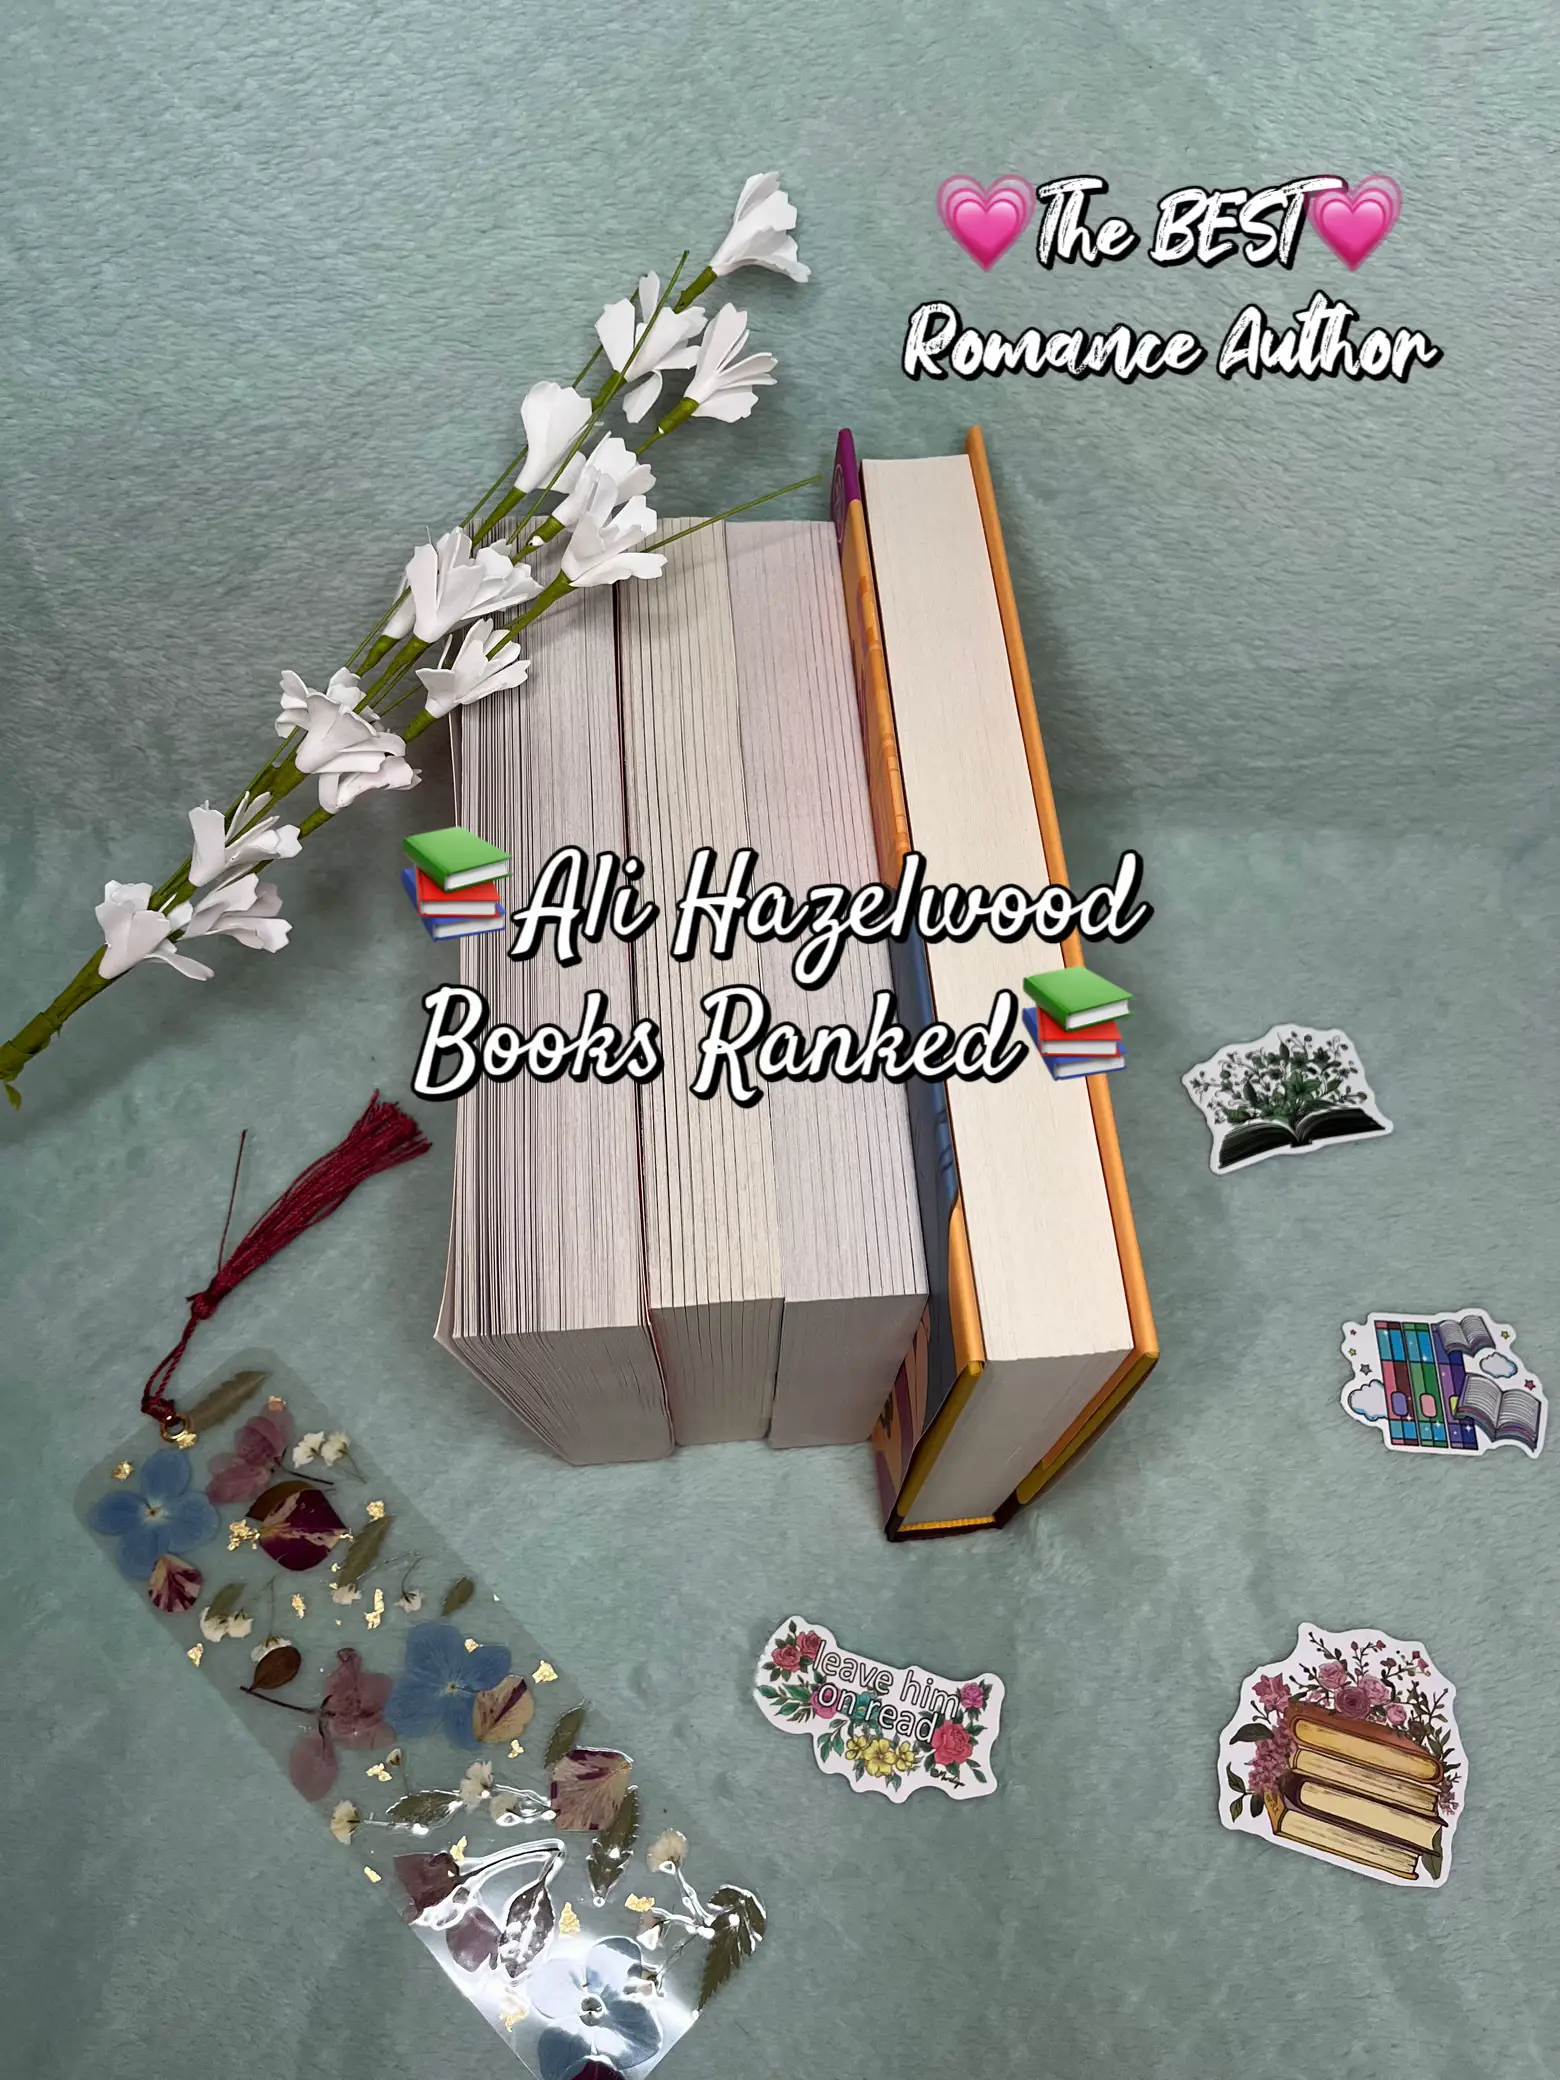 📚Ali Hazelwood Books Ranked📚  Gallery posted by Bethany Taylor